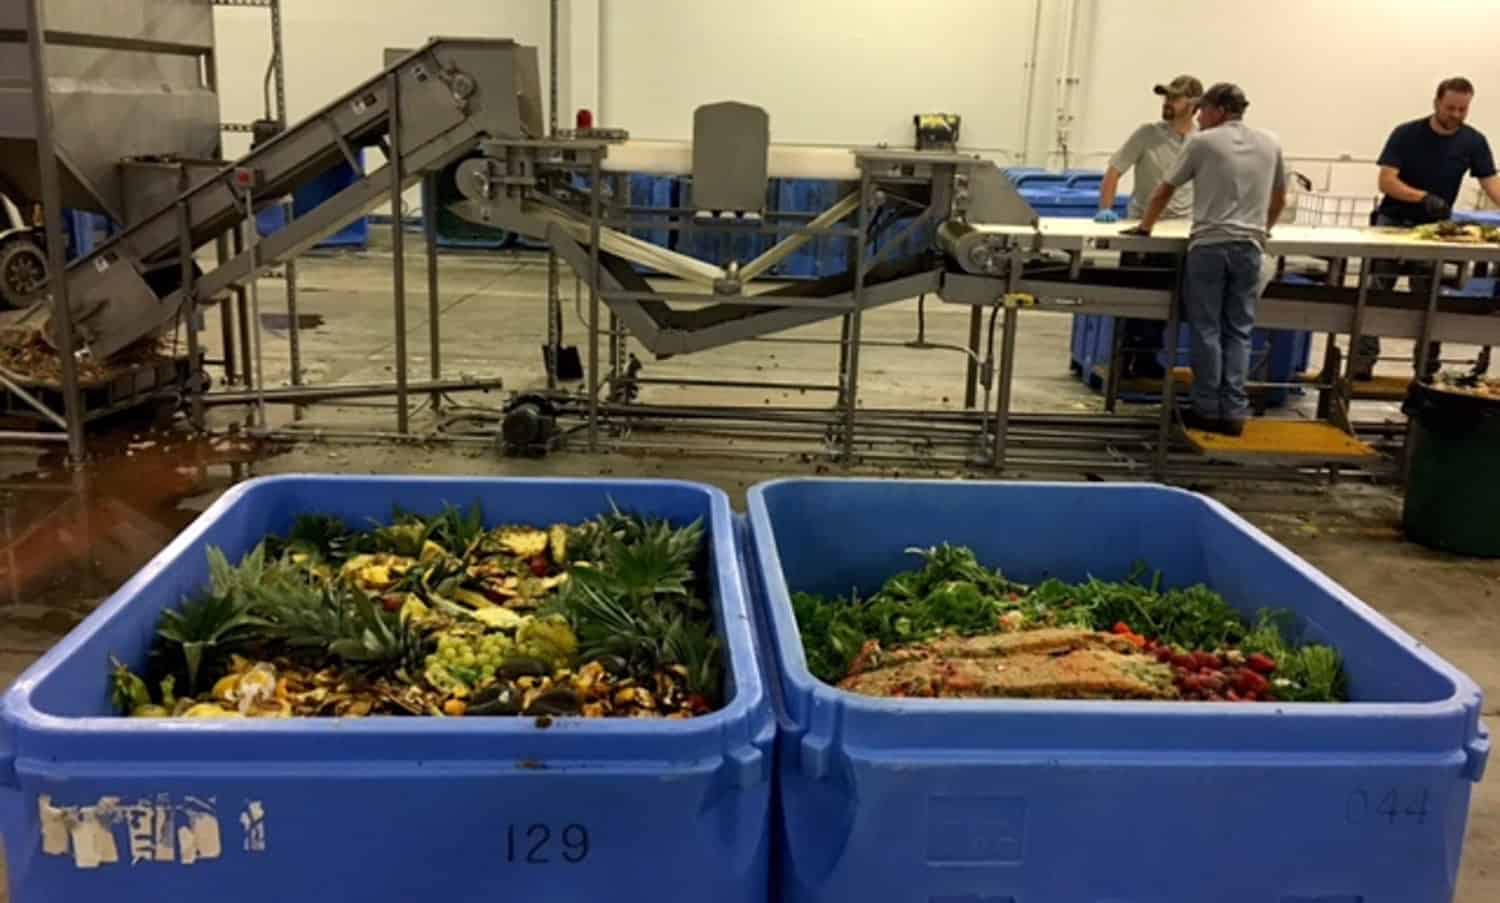 KDC Ag’s new conversion technology can recycle more than 15 tons of food waste and turn it into animal feed in just three hours.